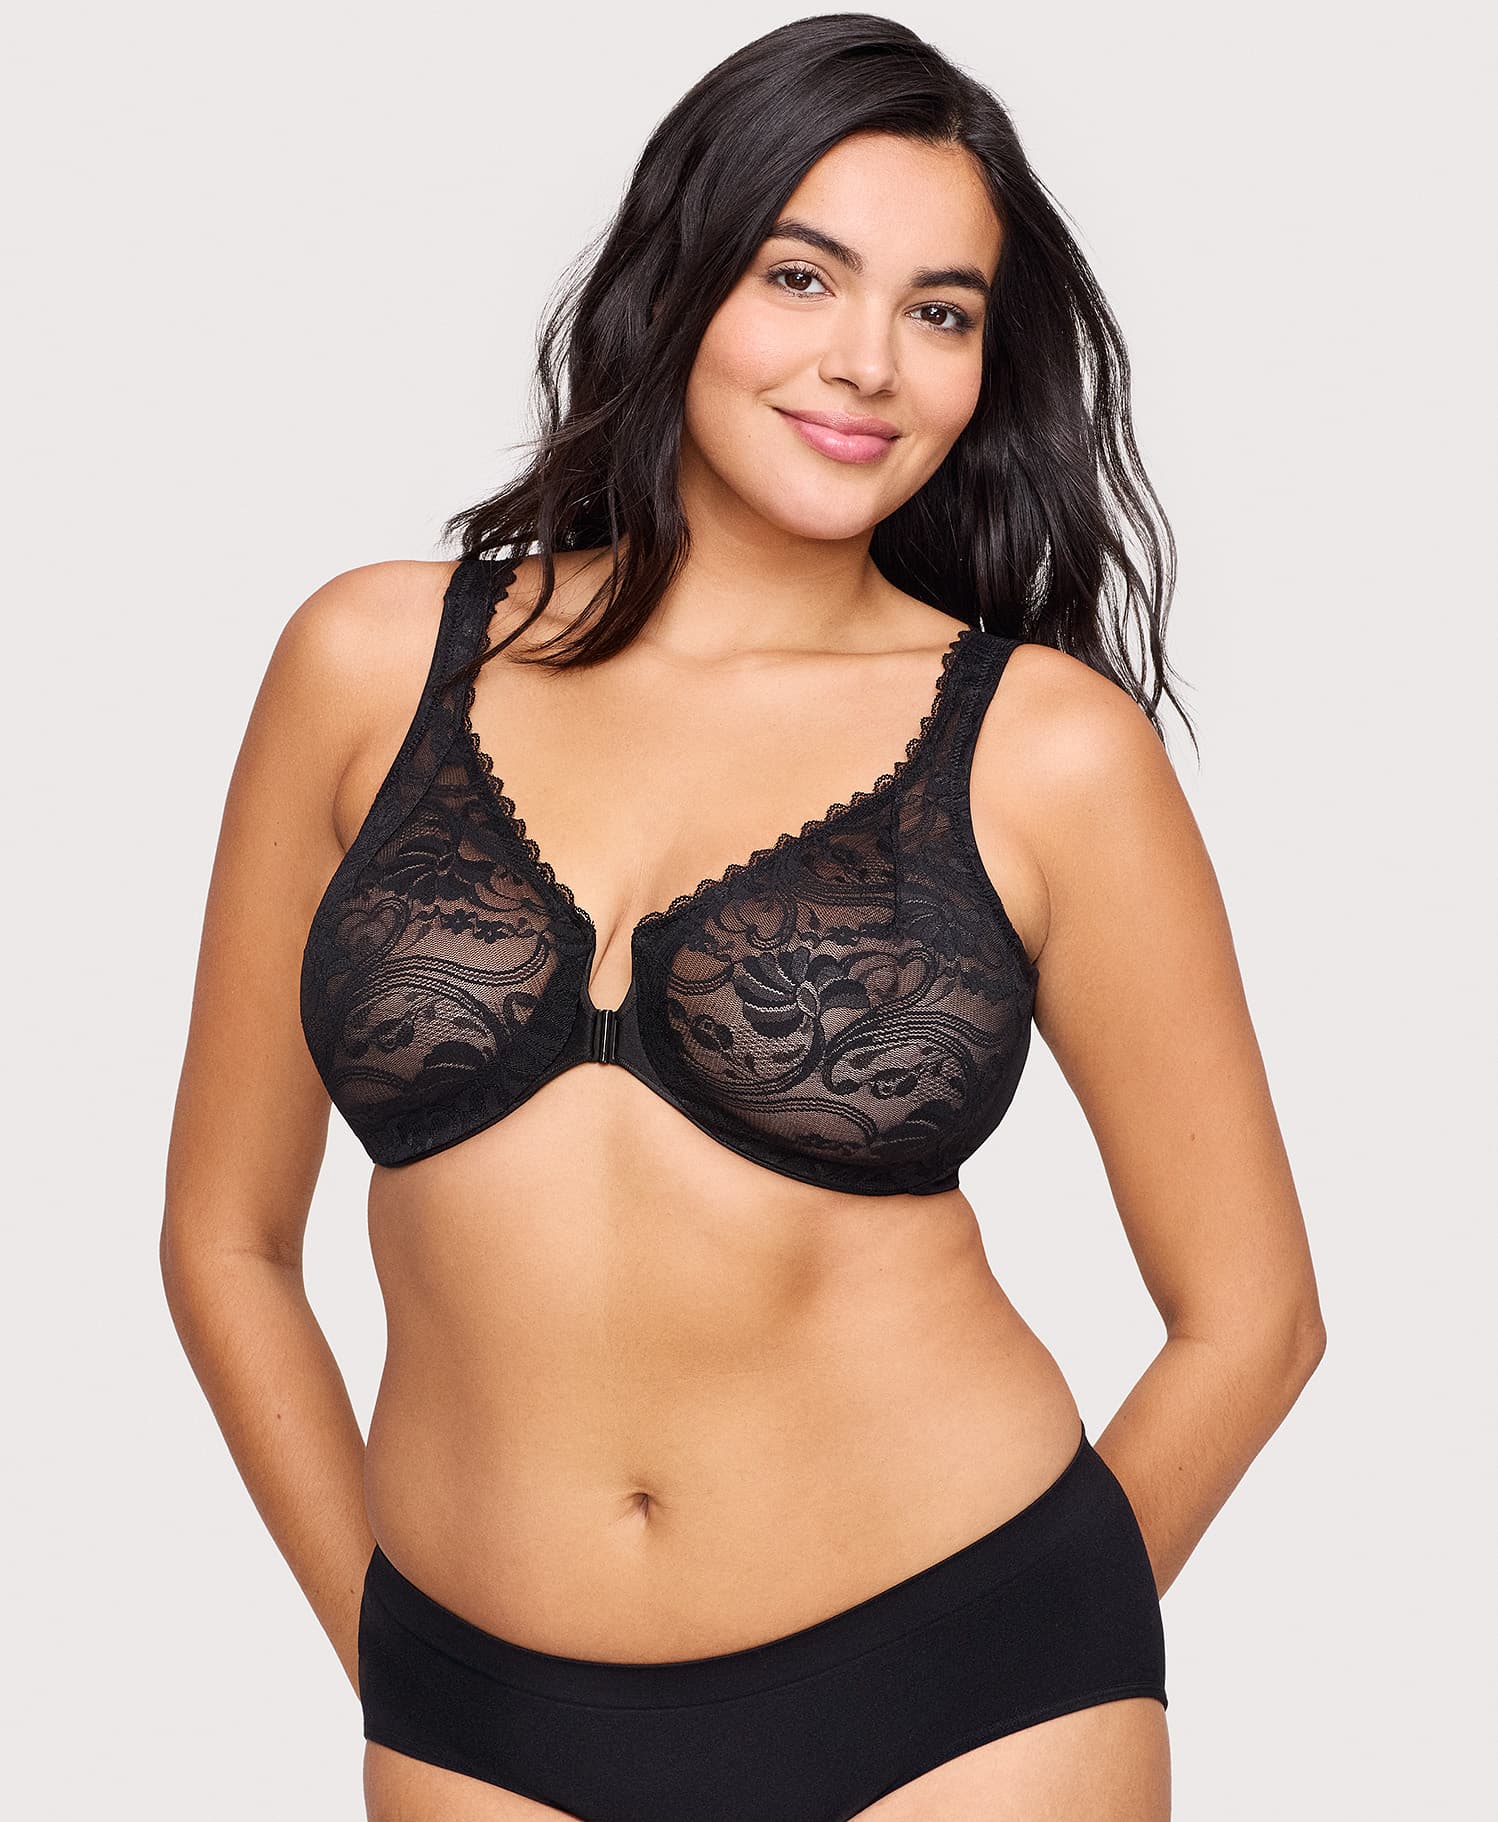 Buy Black Smoothing Strapless Non Pad Wired Bra from Next France